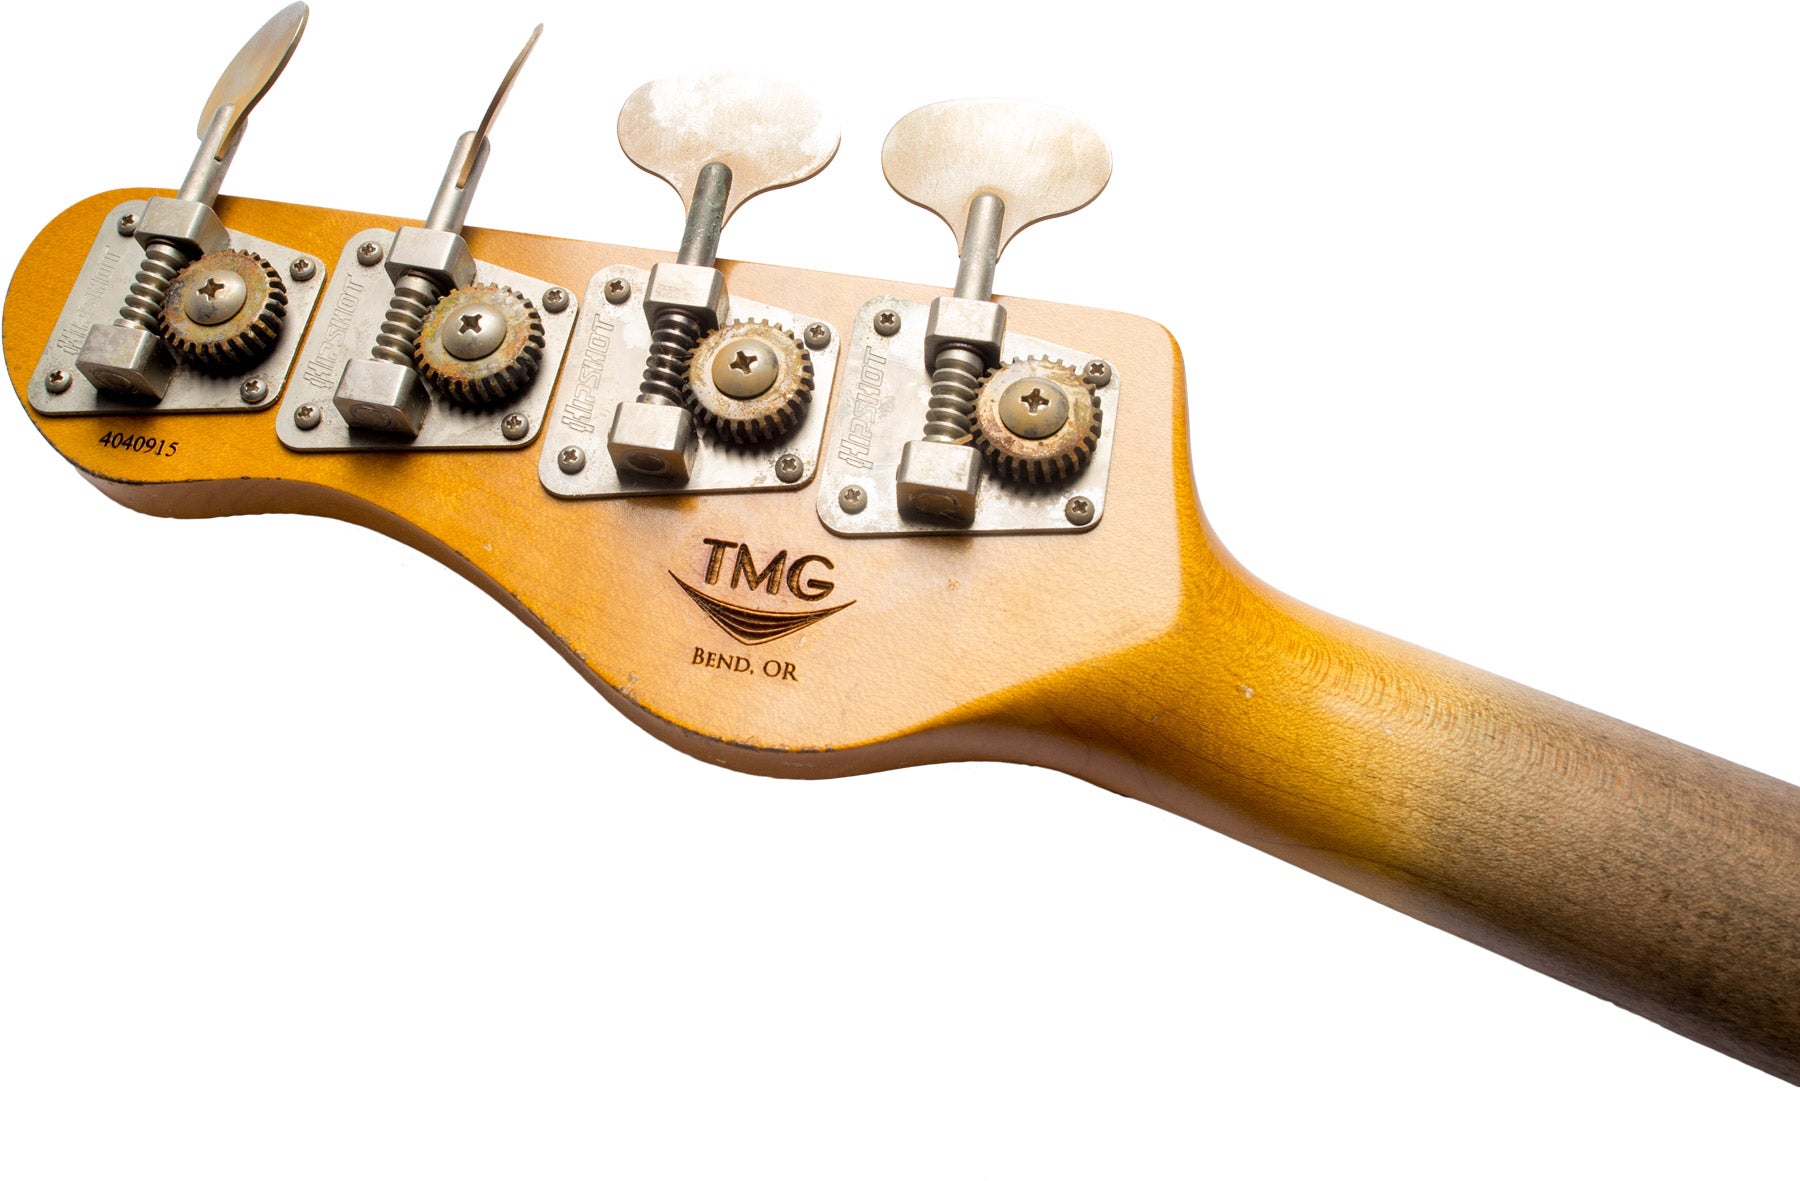 TMG Stetson Neck and Headstock